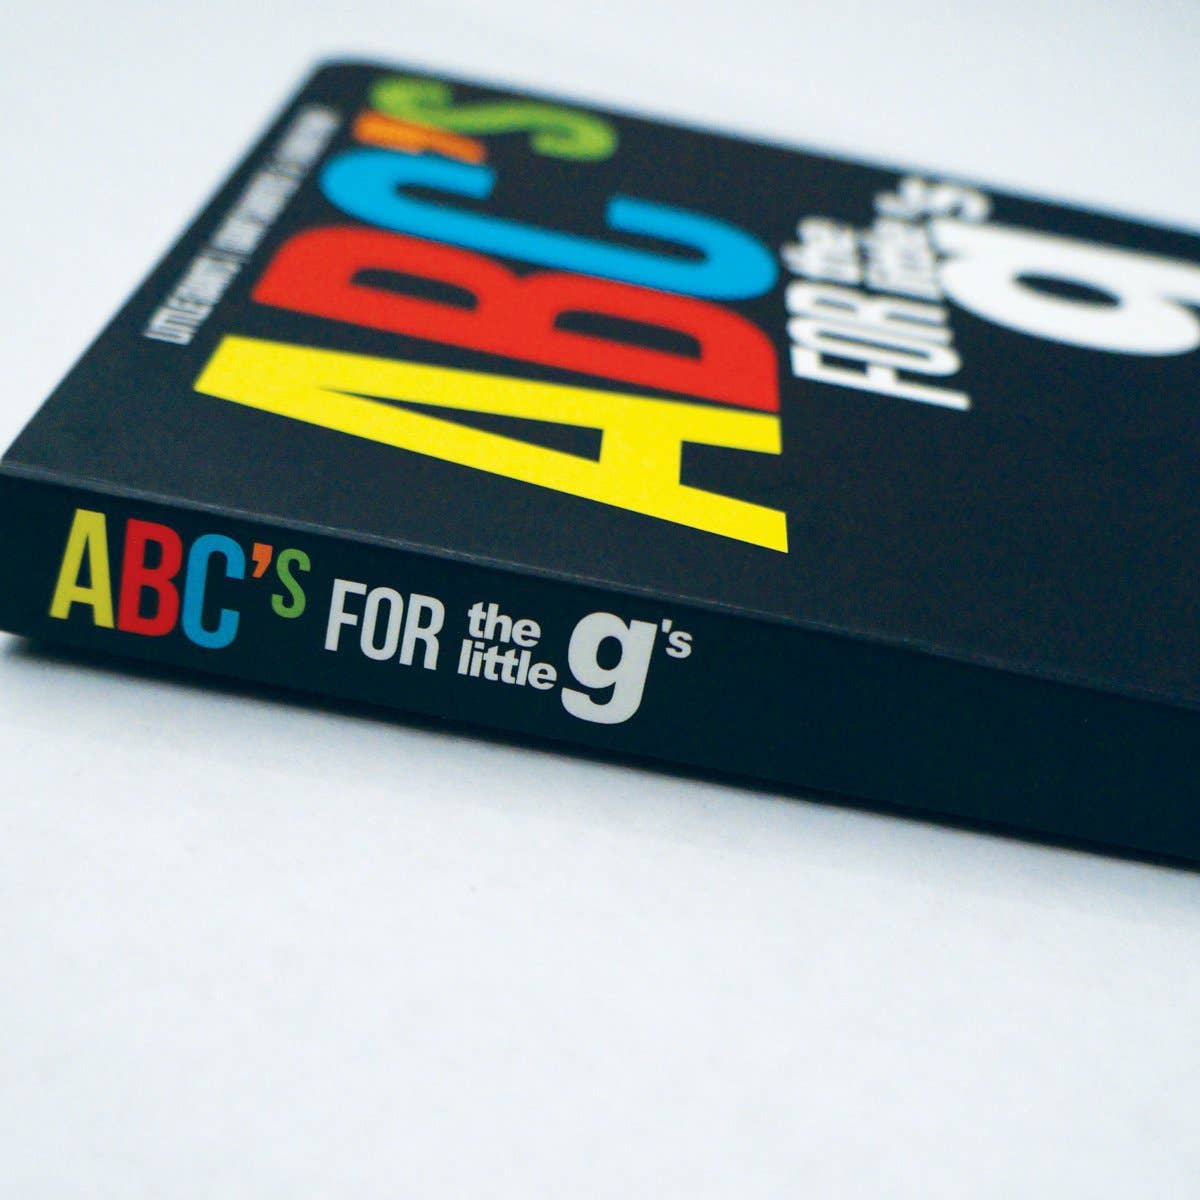 ABC's for the Little G's book